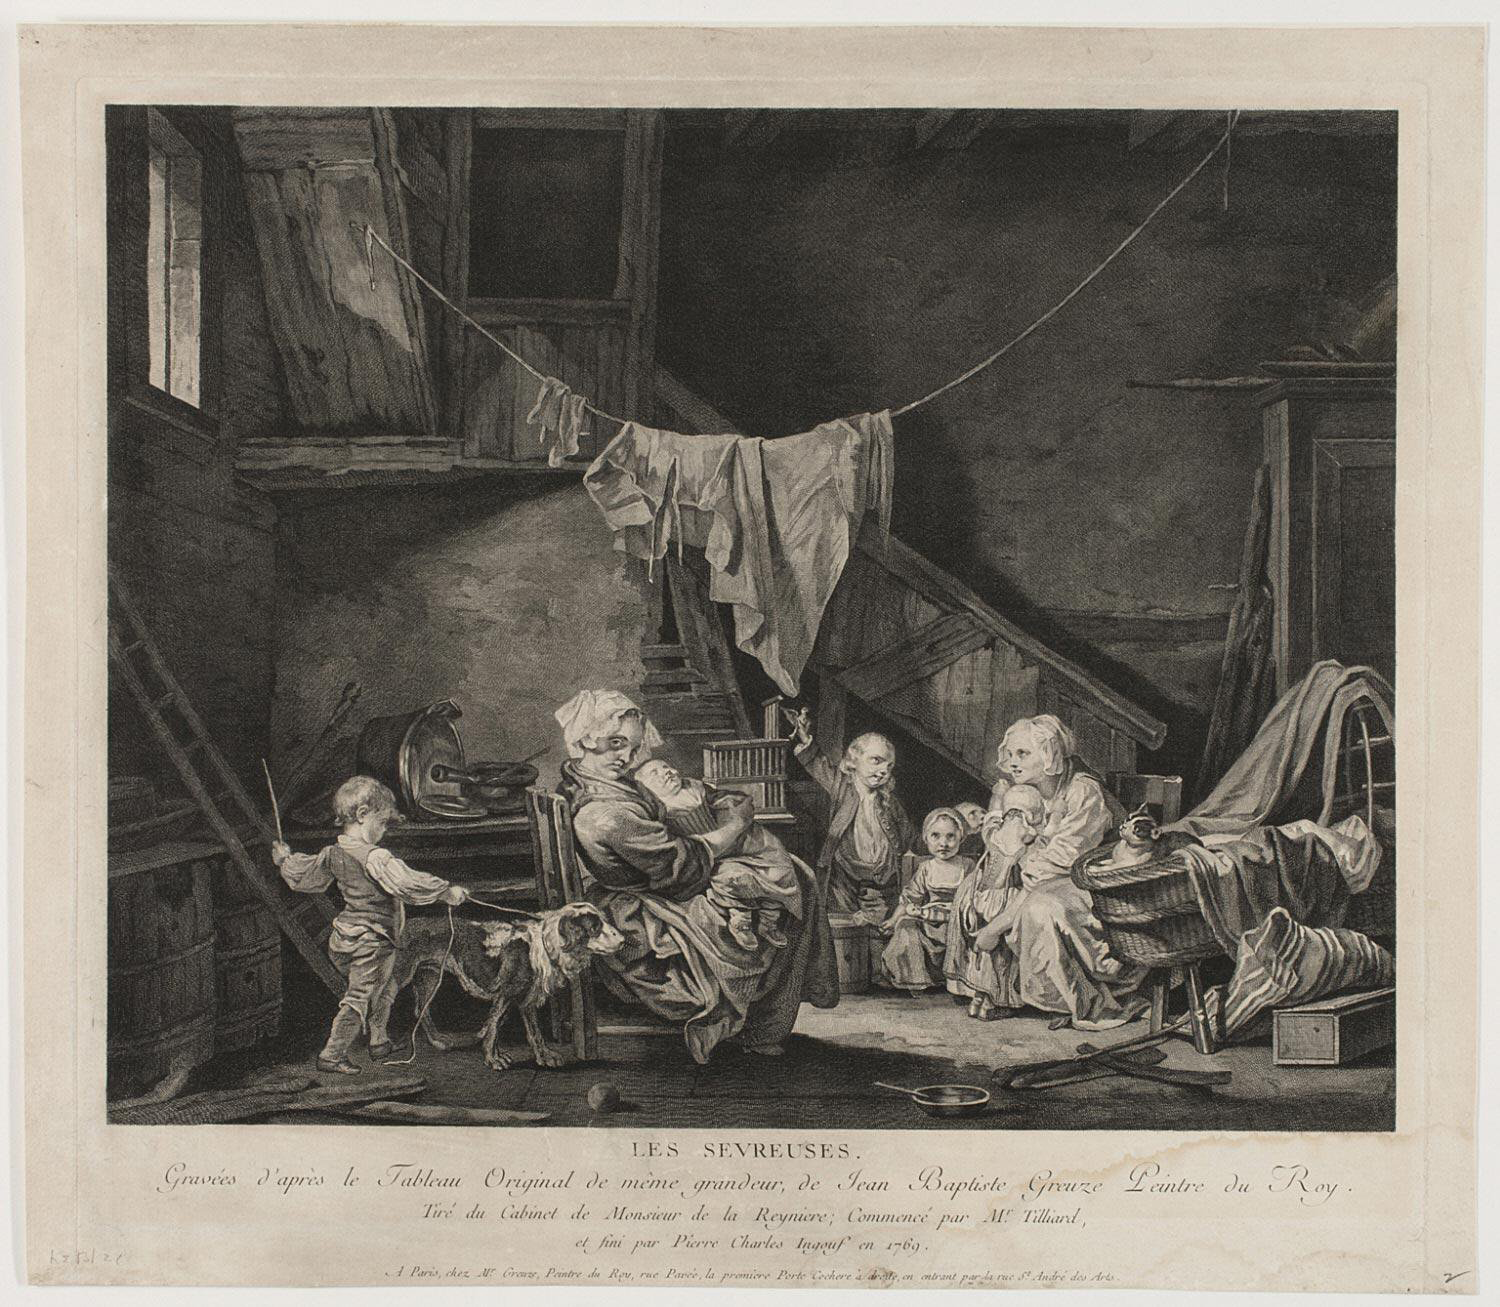 A black and white print of a room with women sitting and tending to the needs of the many children present. One of the women sits on a chair and holds a young child on her lap with her arms wrapped them. Another woman sits near the rest of the children on a bench. A young child leans against her near a basket that has clothes and a cat in it.  A young boy stands holding a stick and a dog by its leash. Above them is a clothesline with fabrics attached. The background consists of an assortment of tools and objects on the tables and cabinets, along with a wooden staircase that leads to another room.